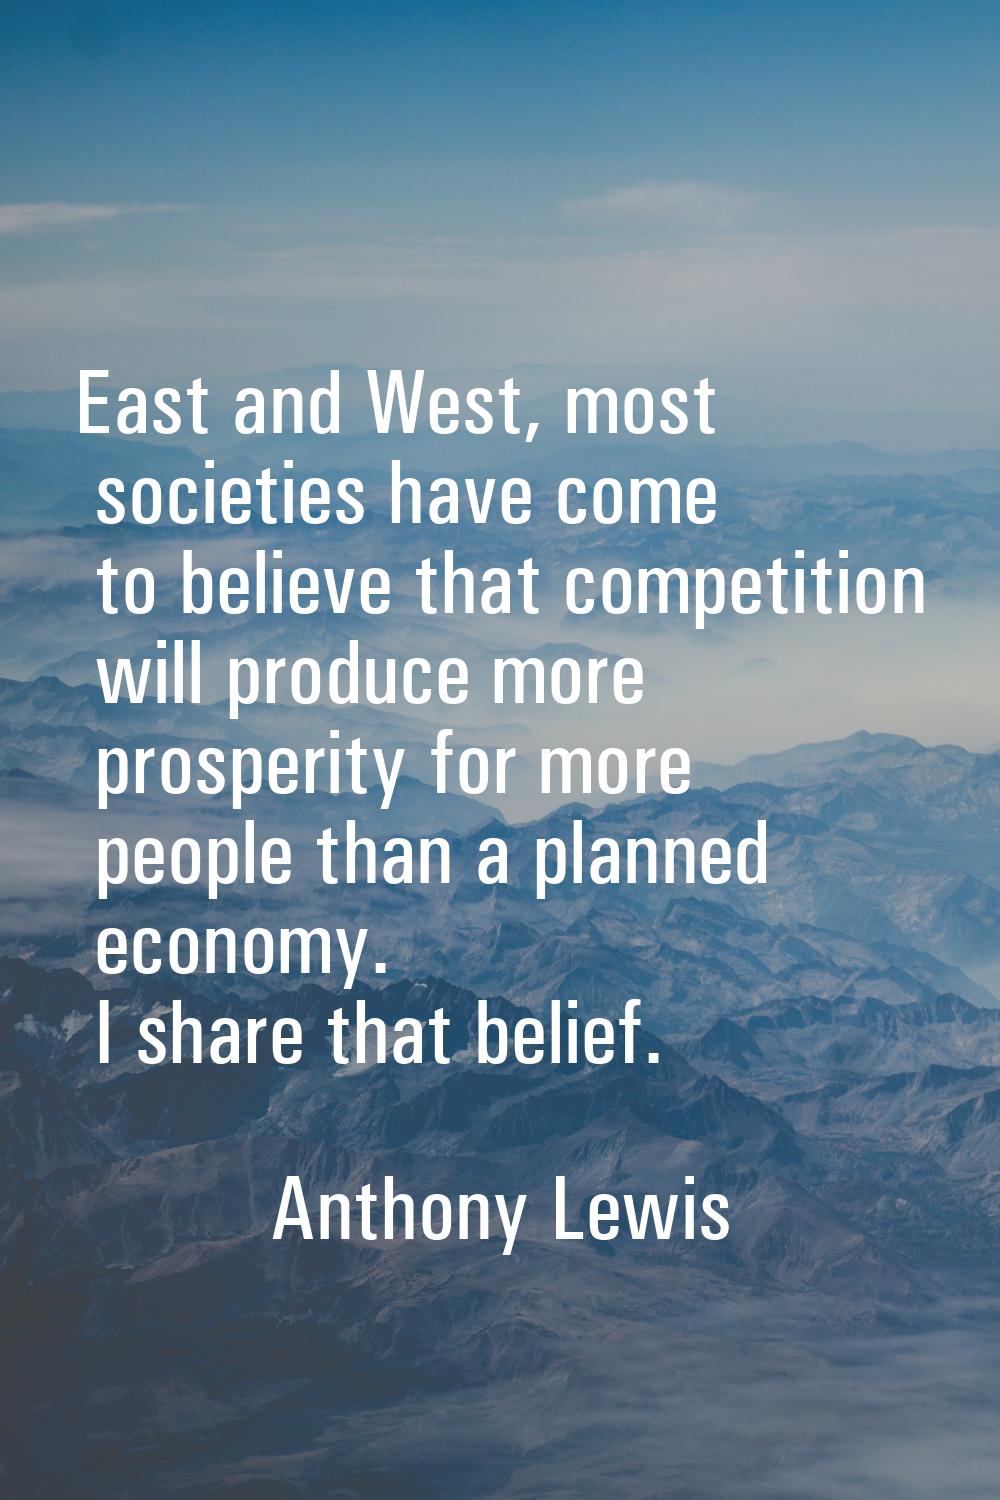 East and West, most societies have come to believe that competition will produce more prosperity fo